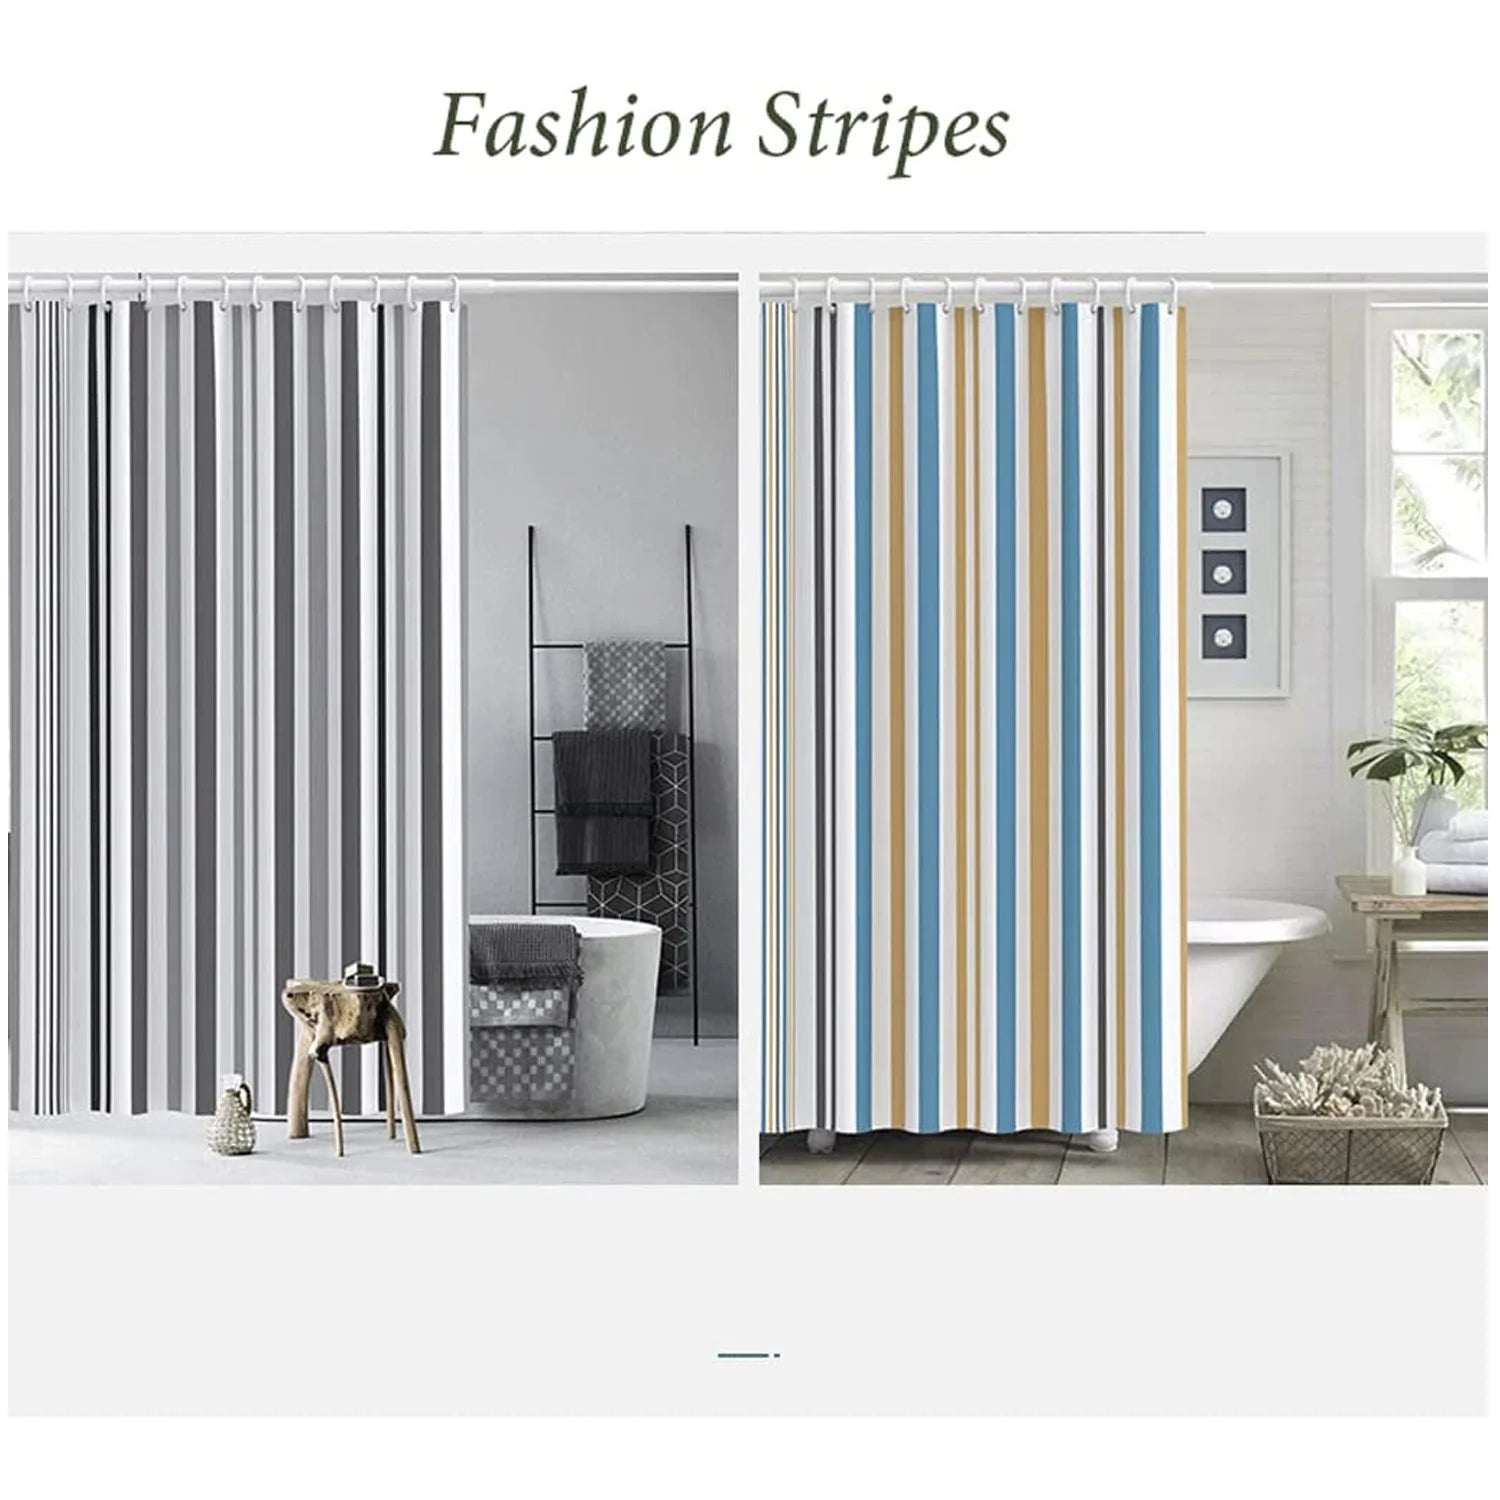 6709  Bright Vertical Stripes in The Shower Curtain (150x180cm) 